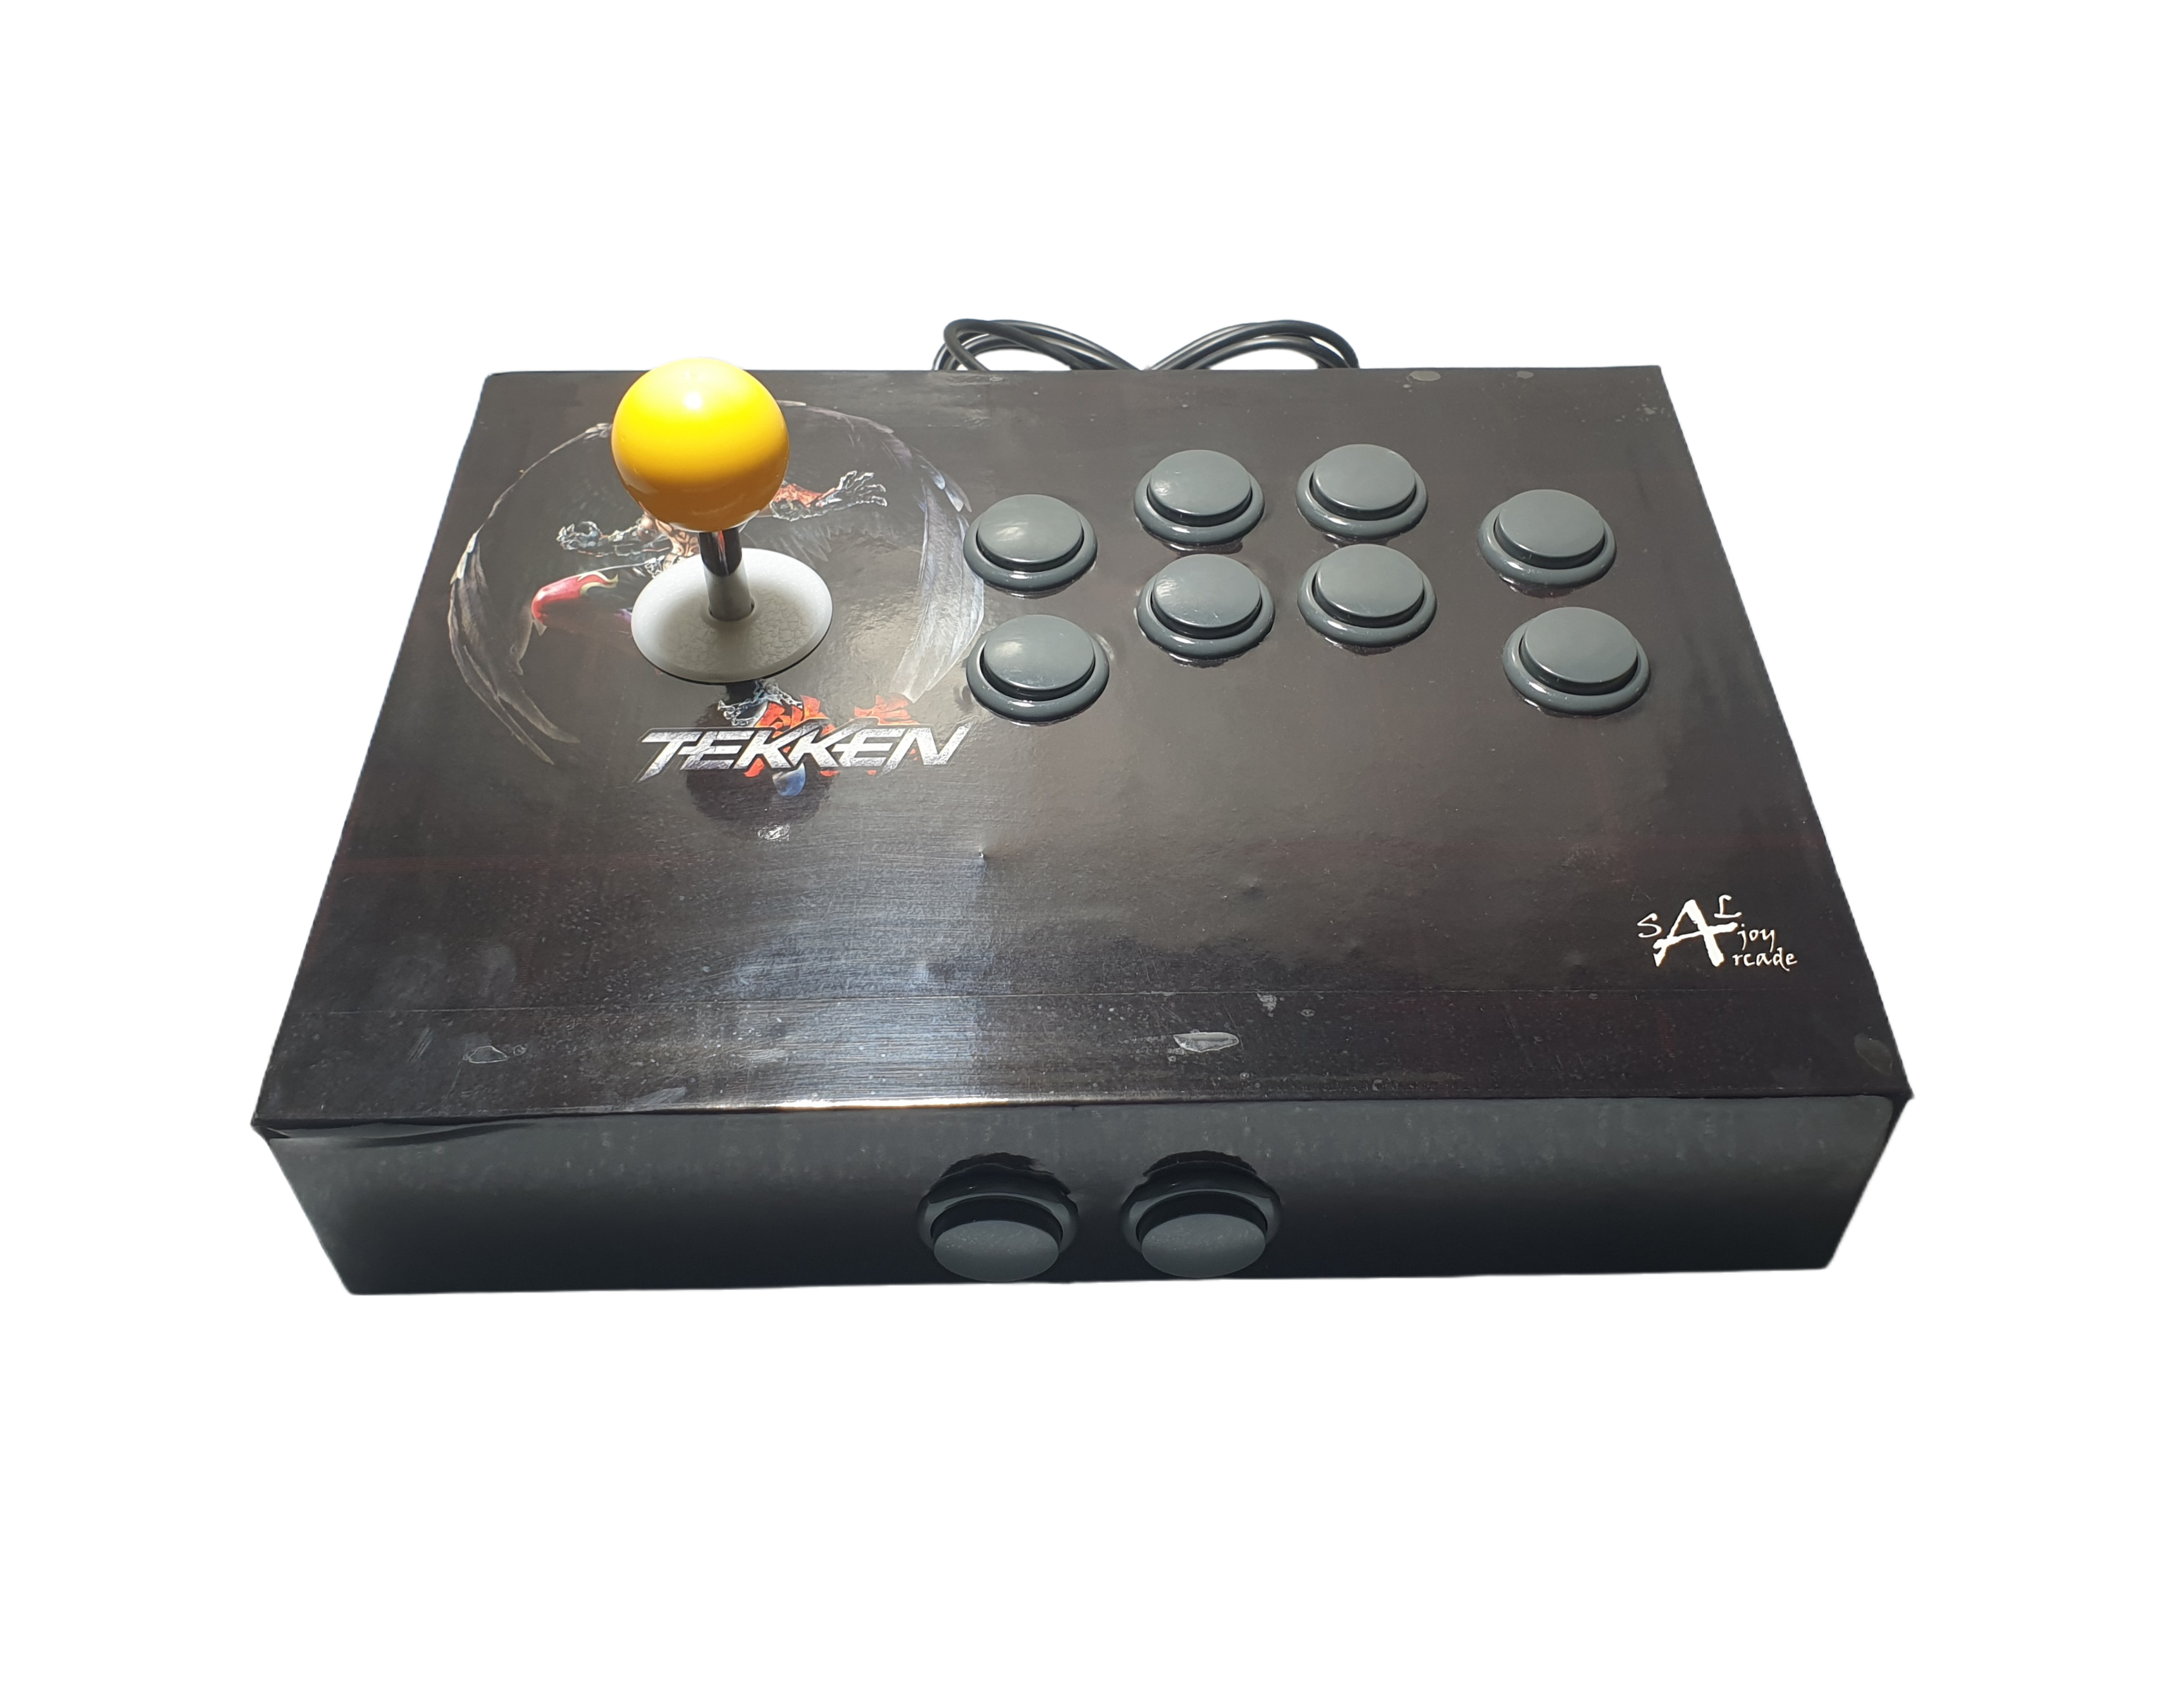 COPY Tekken7 PC USB Arcade Joystick for PS3, Windows and Android Specially Designed for Takken7 PC [Model: YST7]